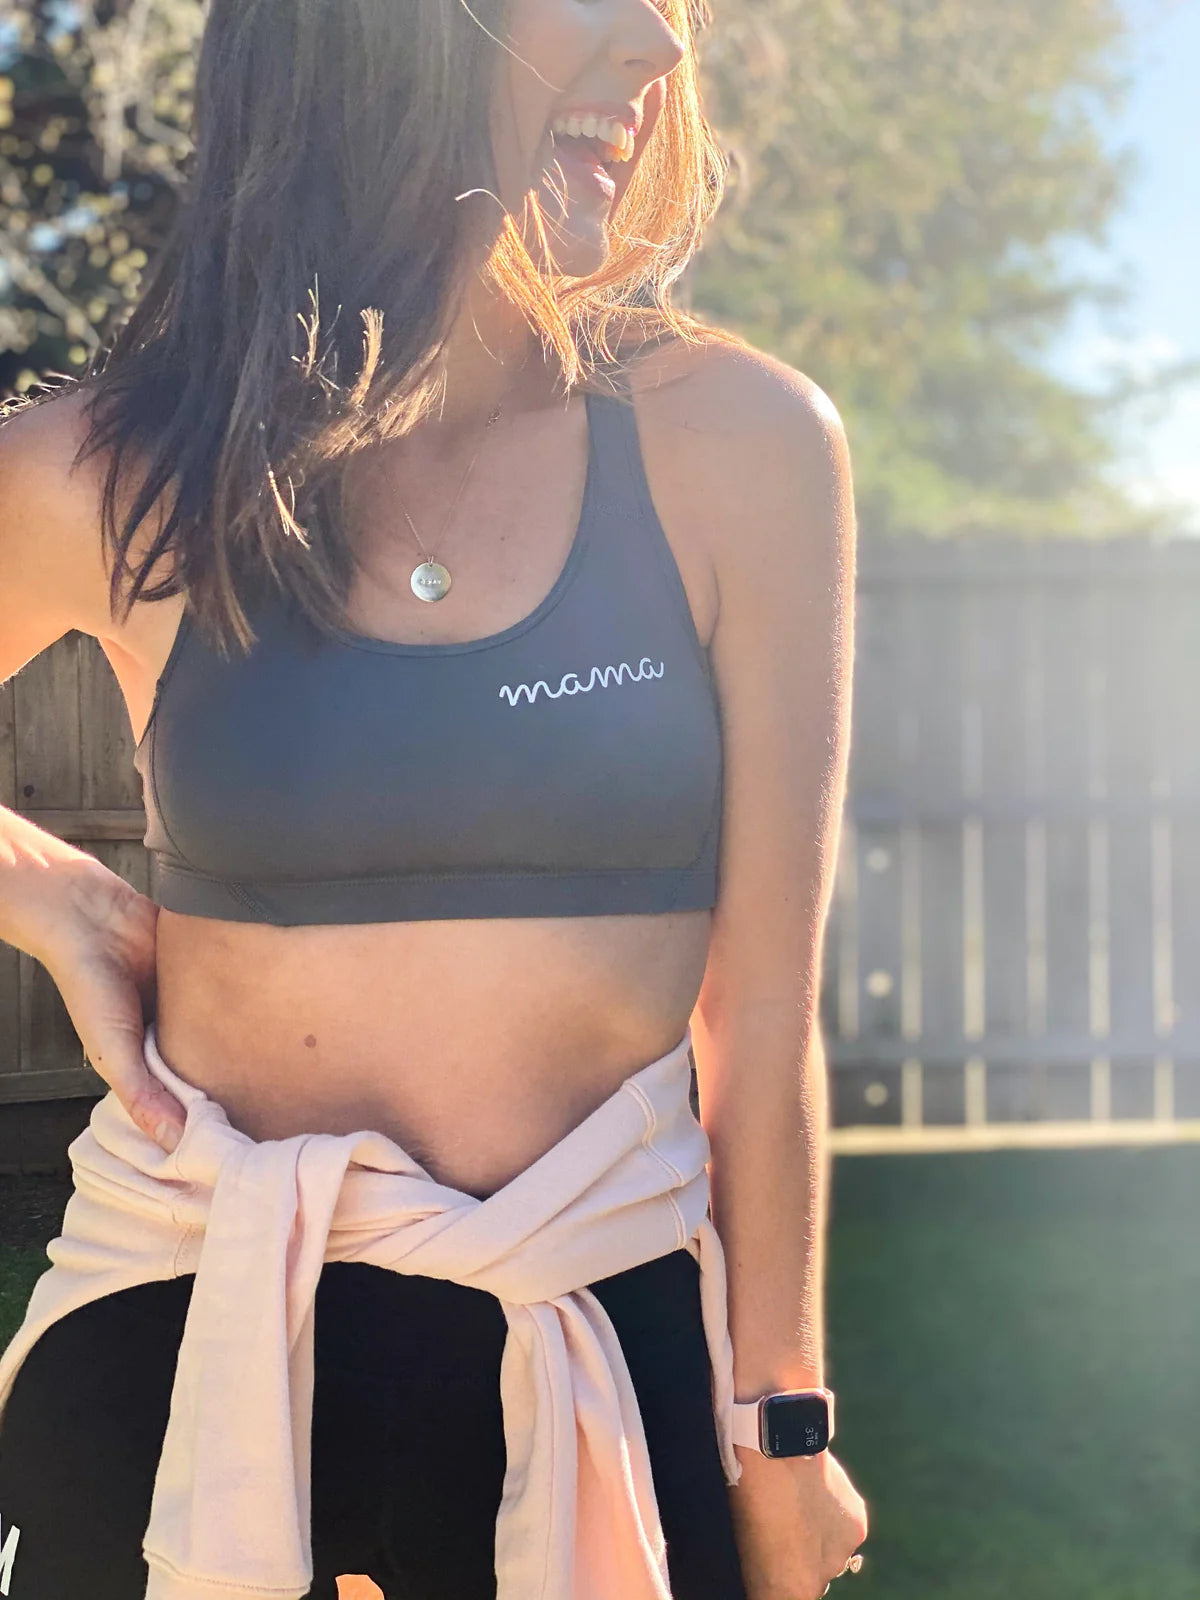 A woman wearing a sports bra that says Mama